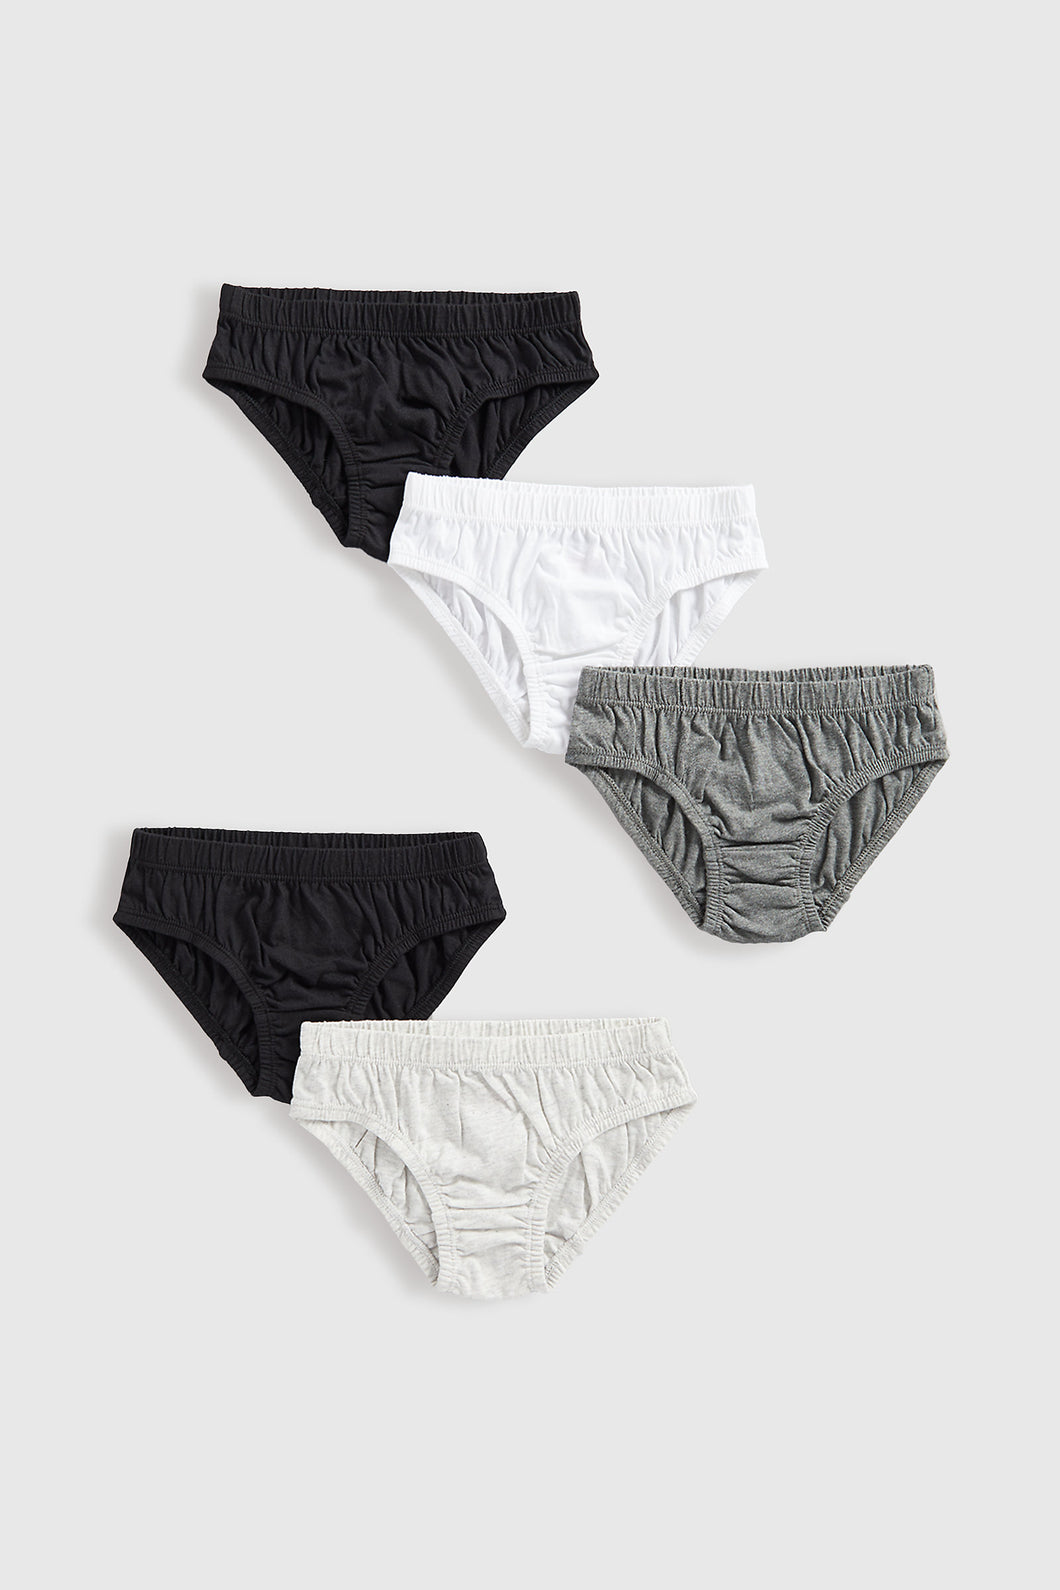 Mothercare Black, Grey And White Briefs - 5 Pack